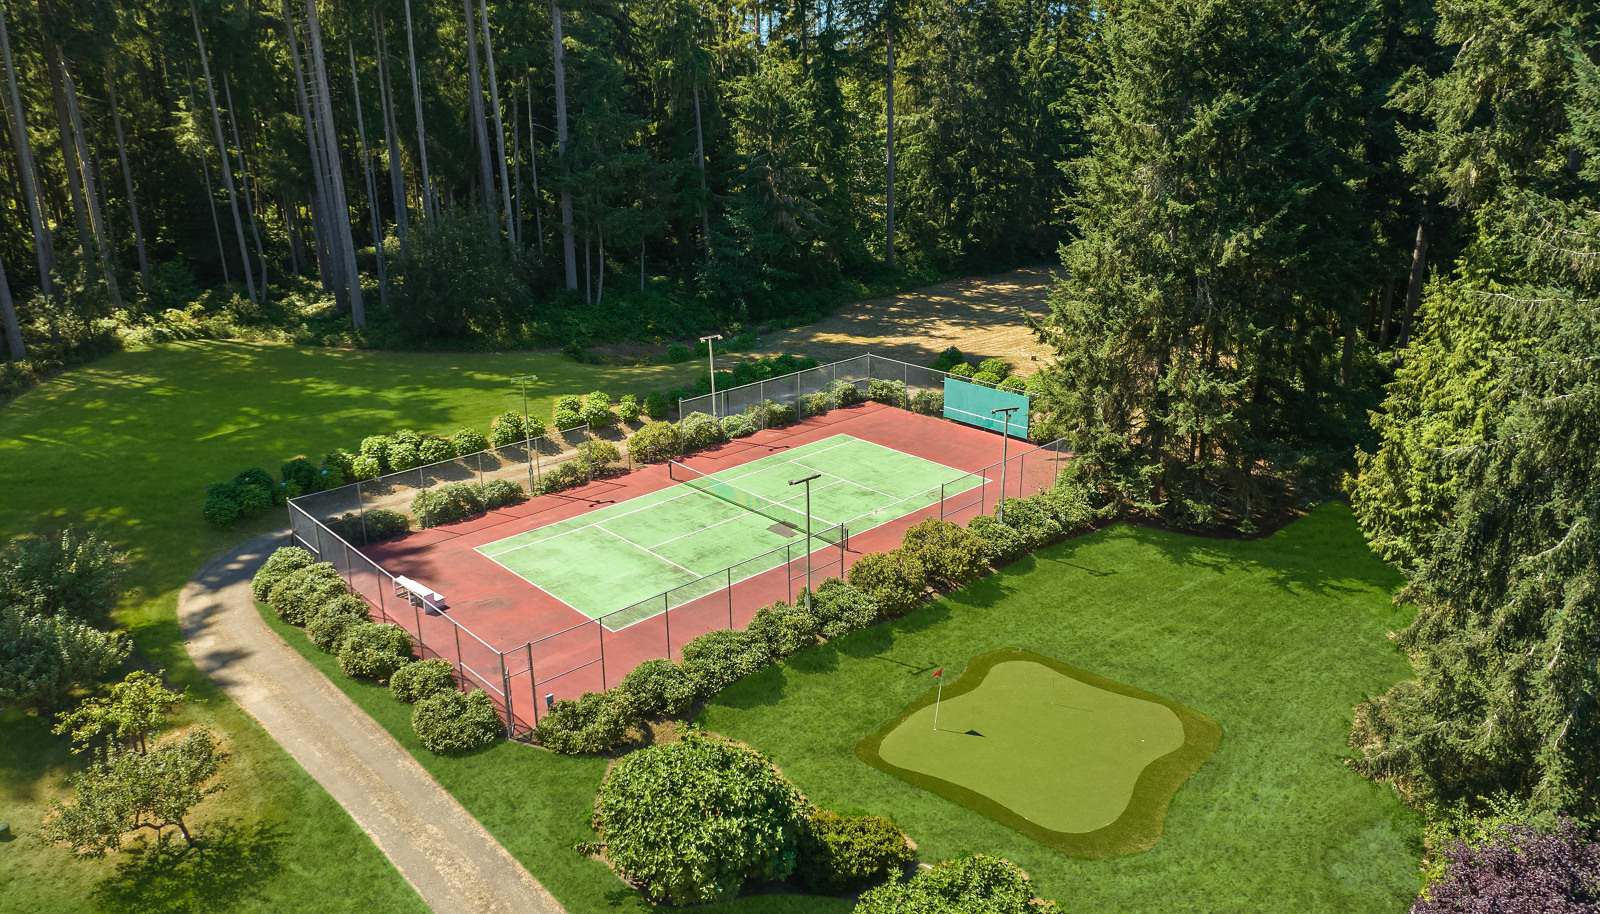 Tennis, golf, walking trails, two ponds, old growth forest, VIEWS, total privacy and a 100% self sustaining property.